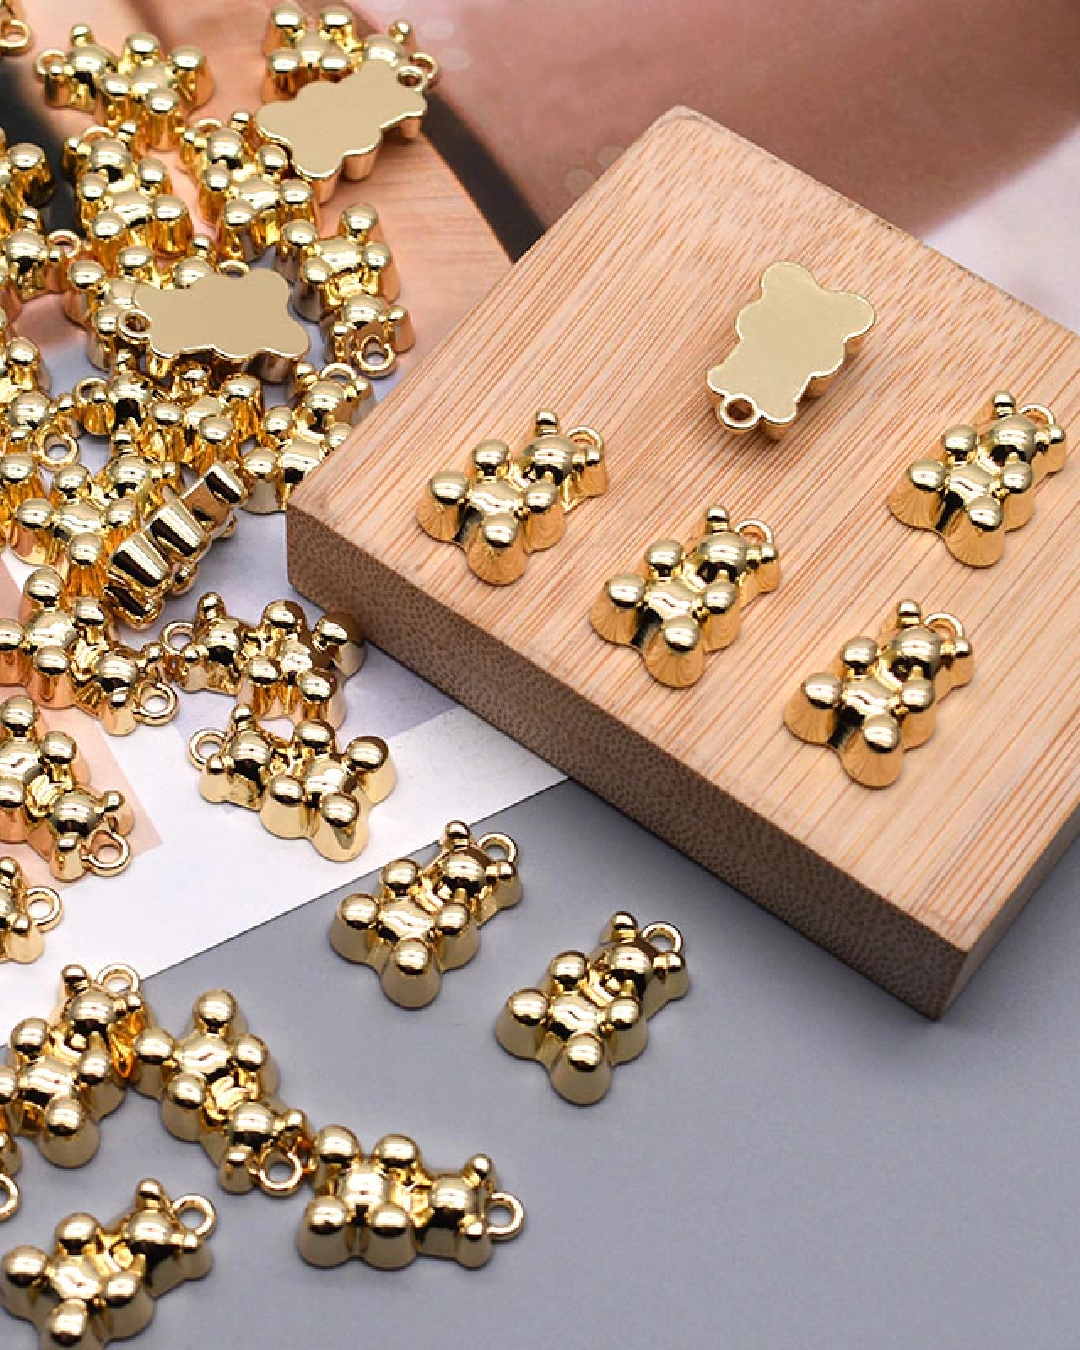 Gold bear charms